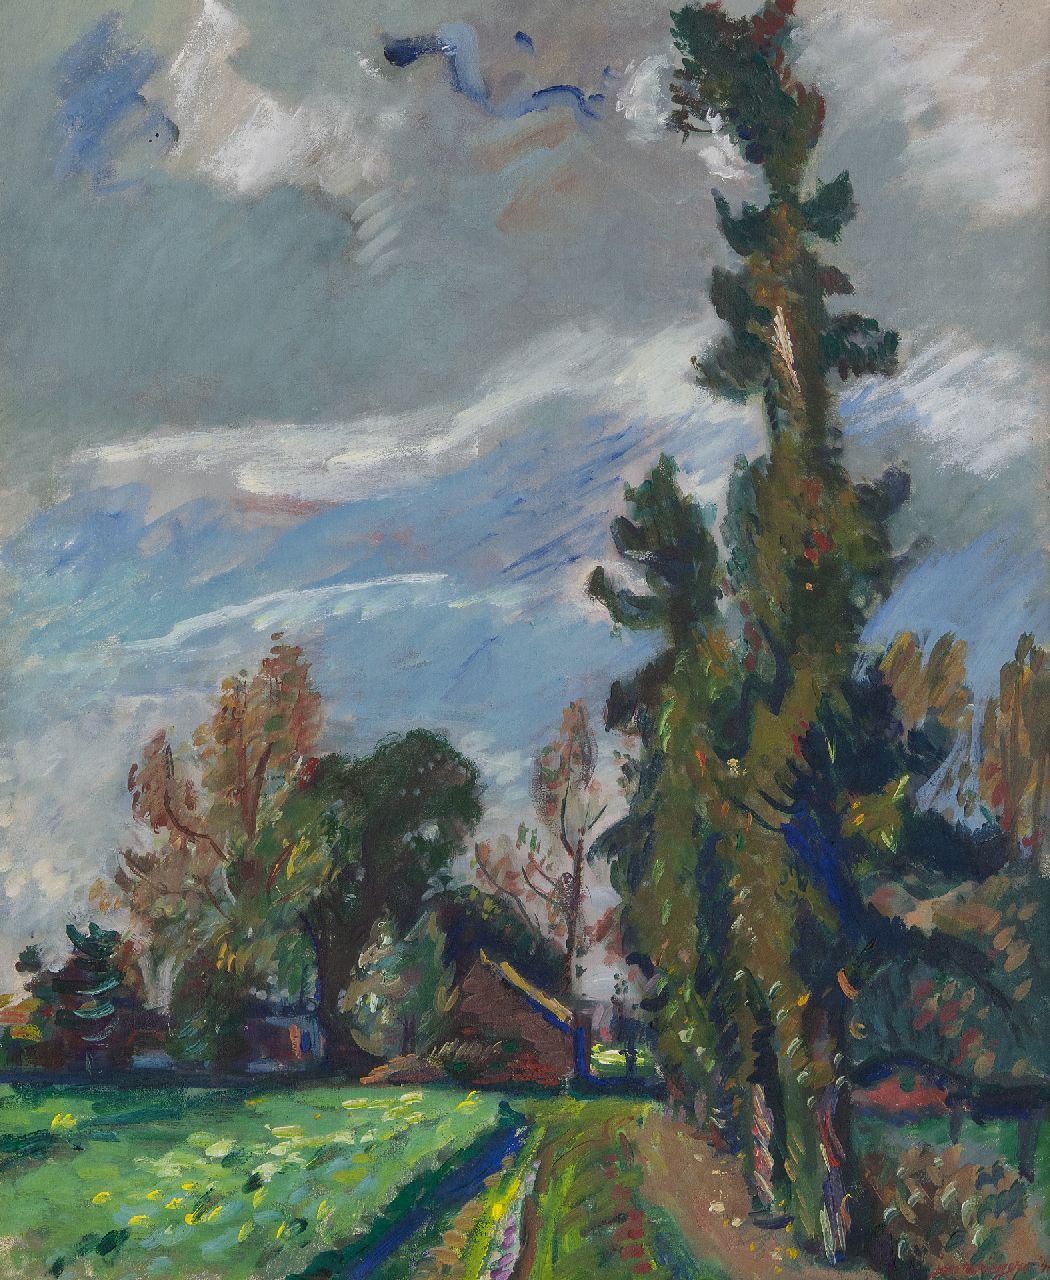 Wiegers J.  | Jan Wiegers | Paintings offered for sale | Landscape Veluwe, oil on canvas 61.4 x 50.5 cm, signed l.r. and dated '41